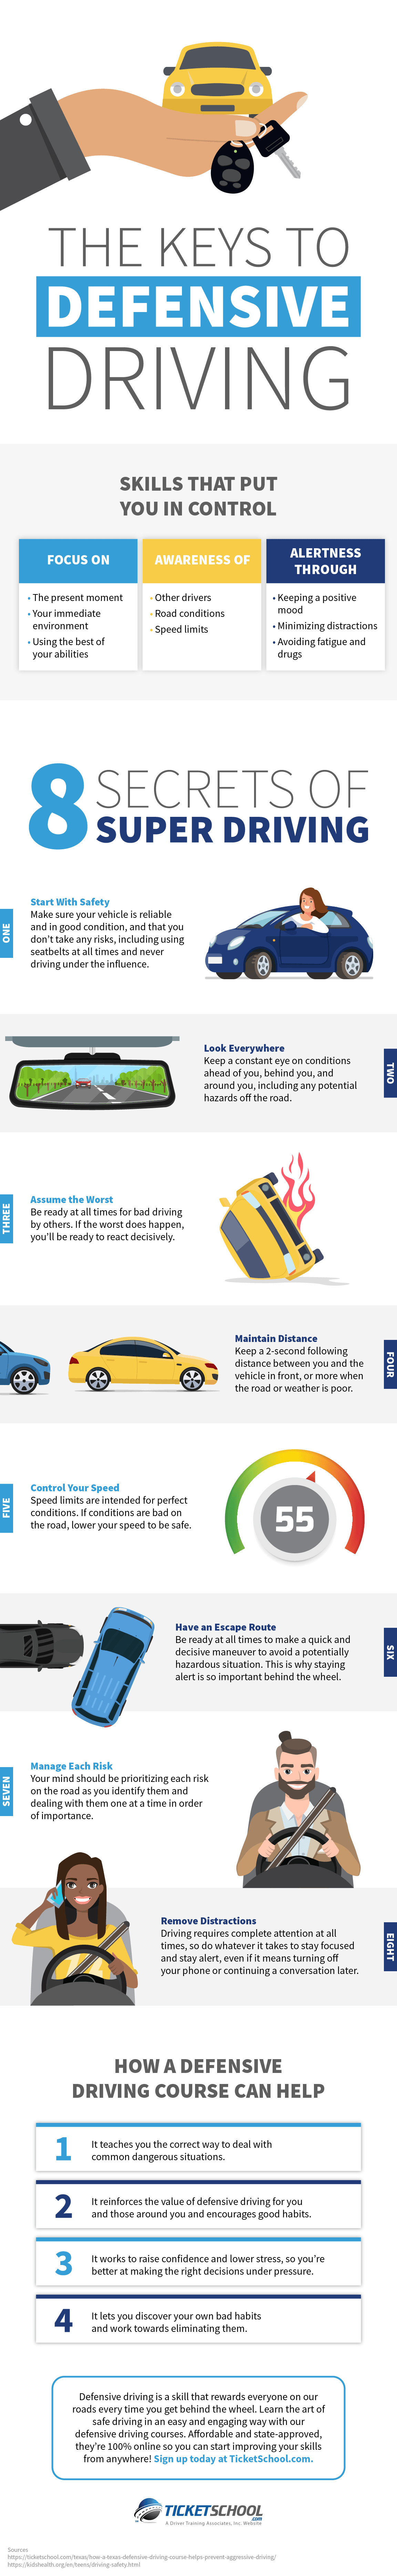 The Keys to Defensive Driving Infographic